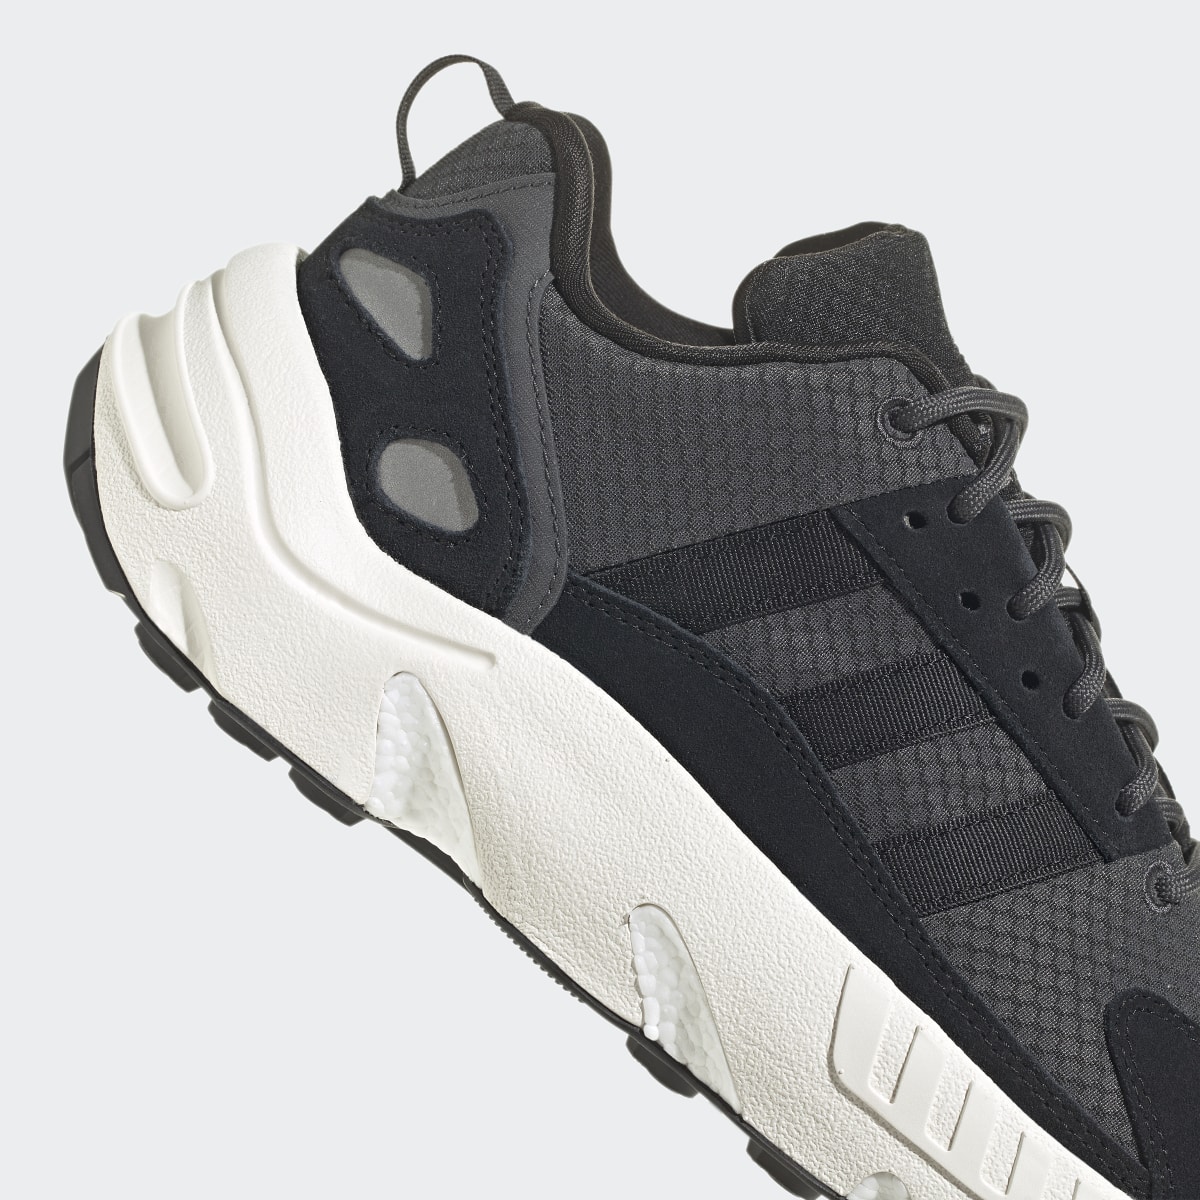 Adidas ZX 22 BOOST Shoes. 9